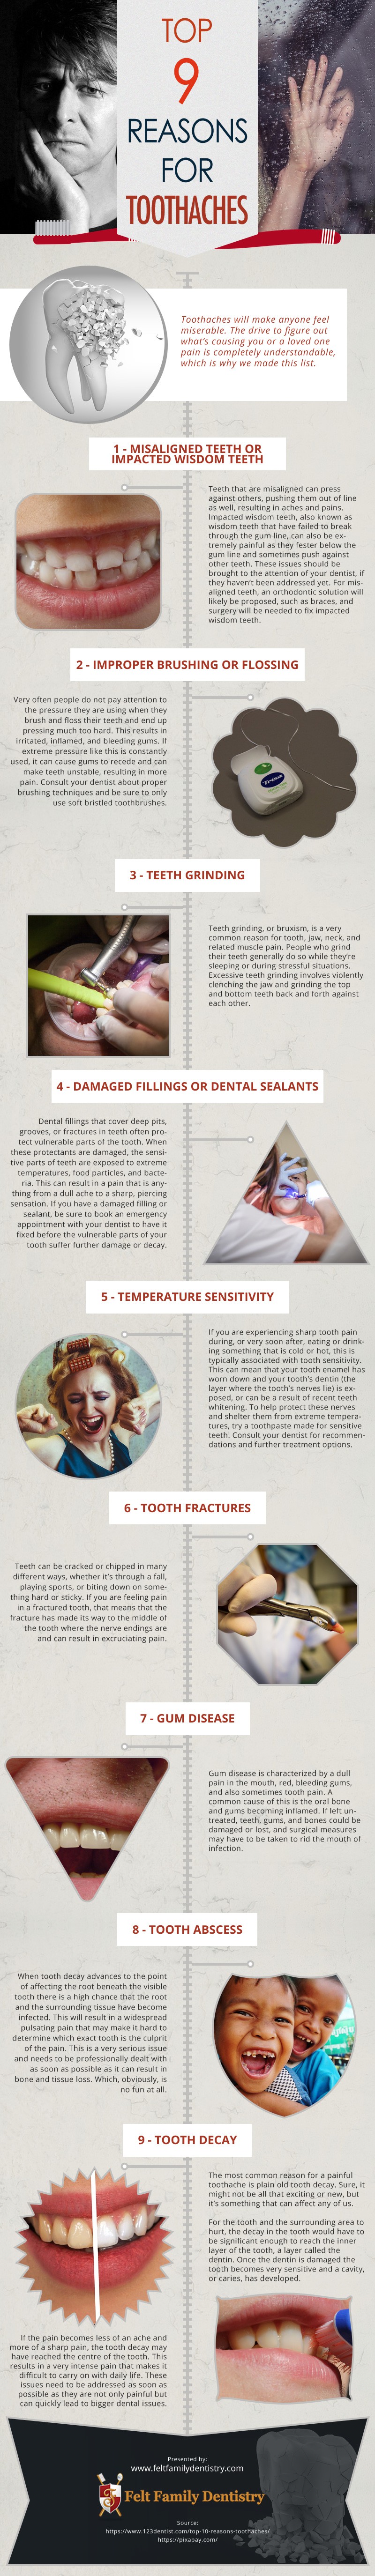 Top 9 Reasons for Toothaches [infographic]